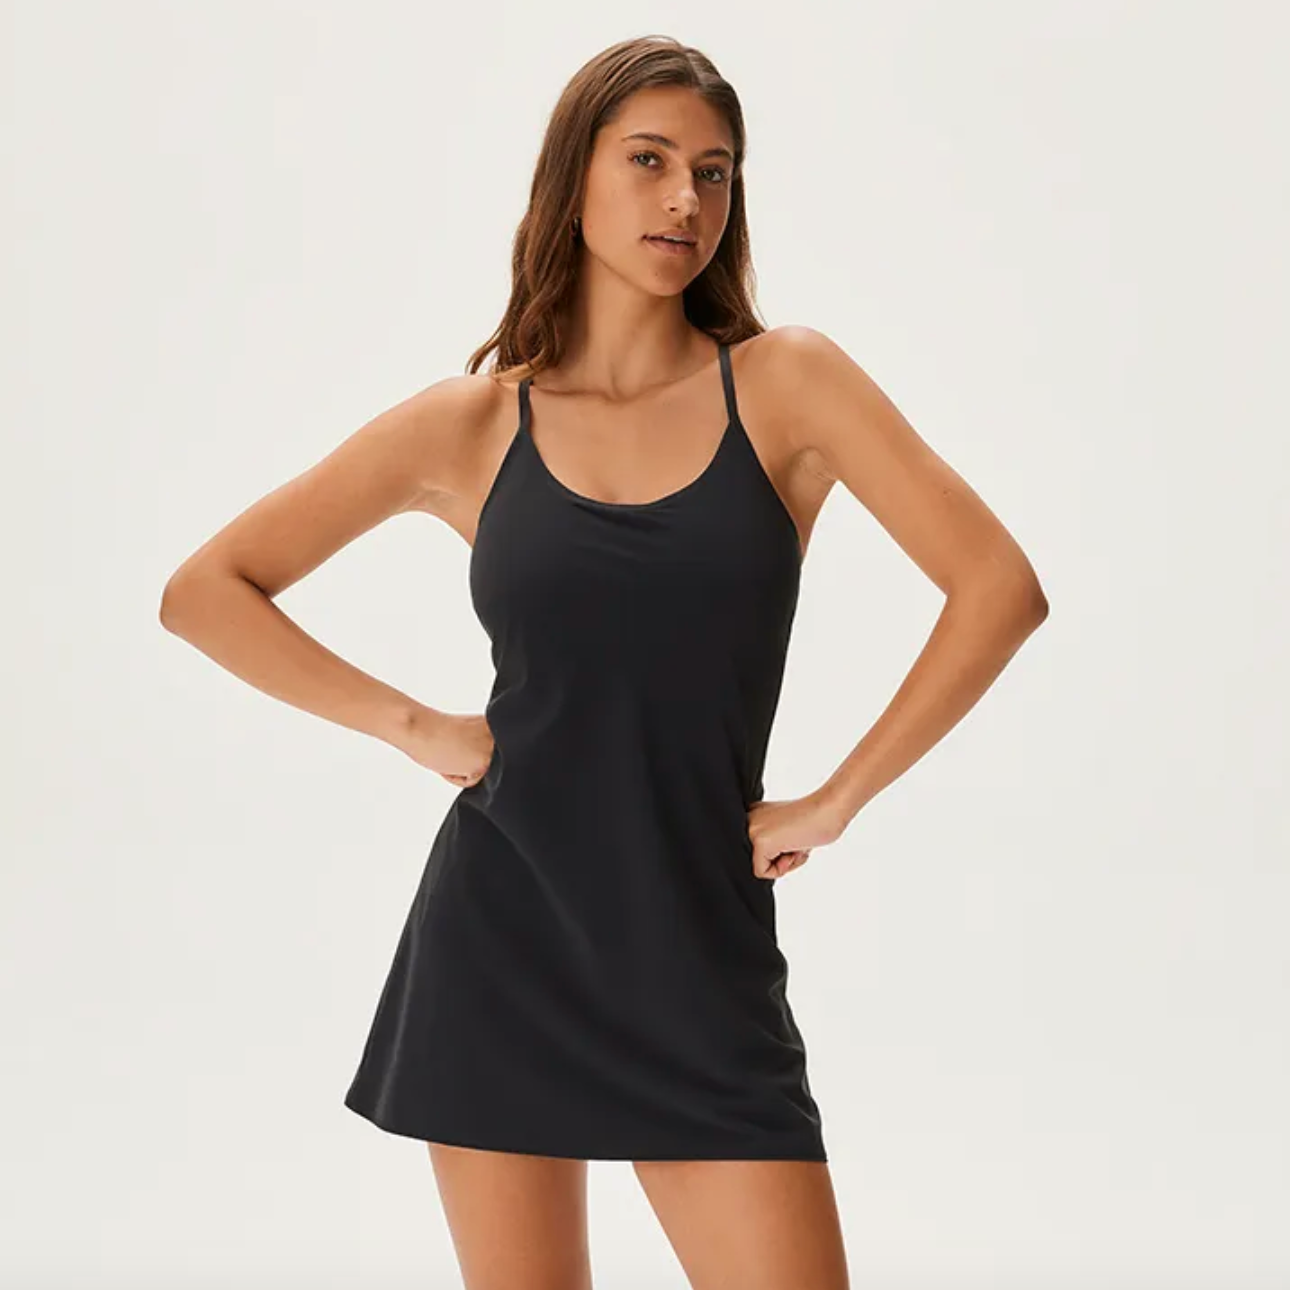 Outdoor Voices Women's The Exercise Dress